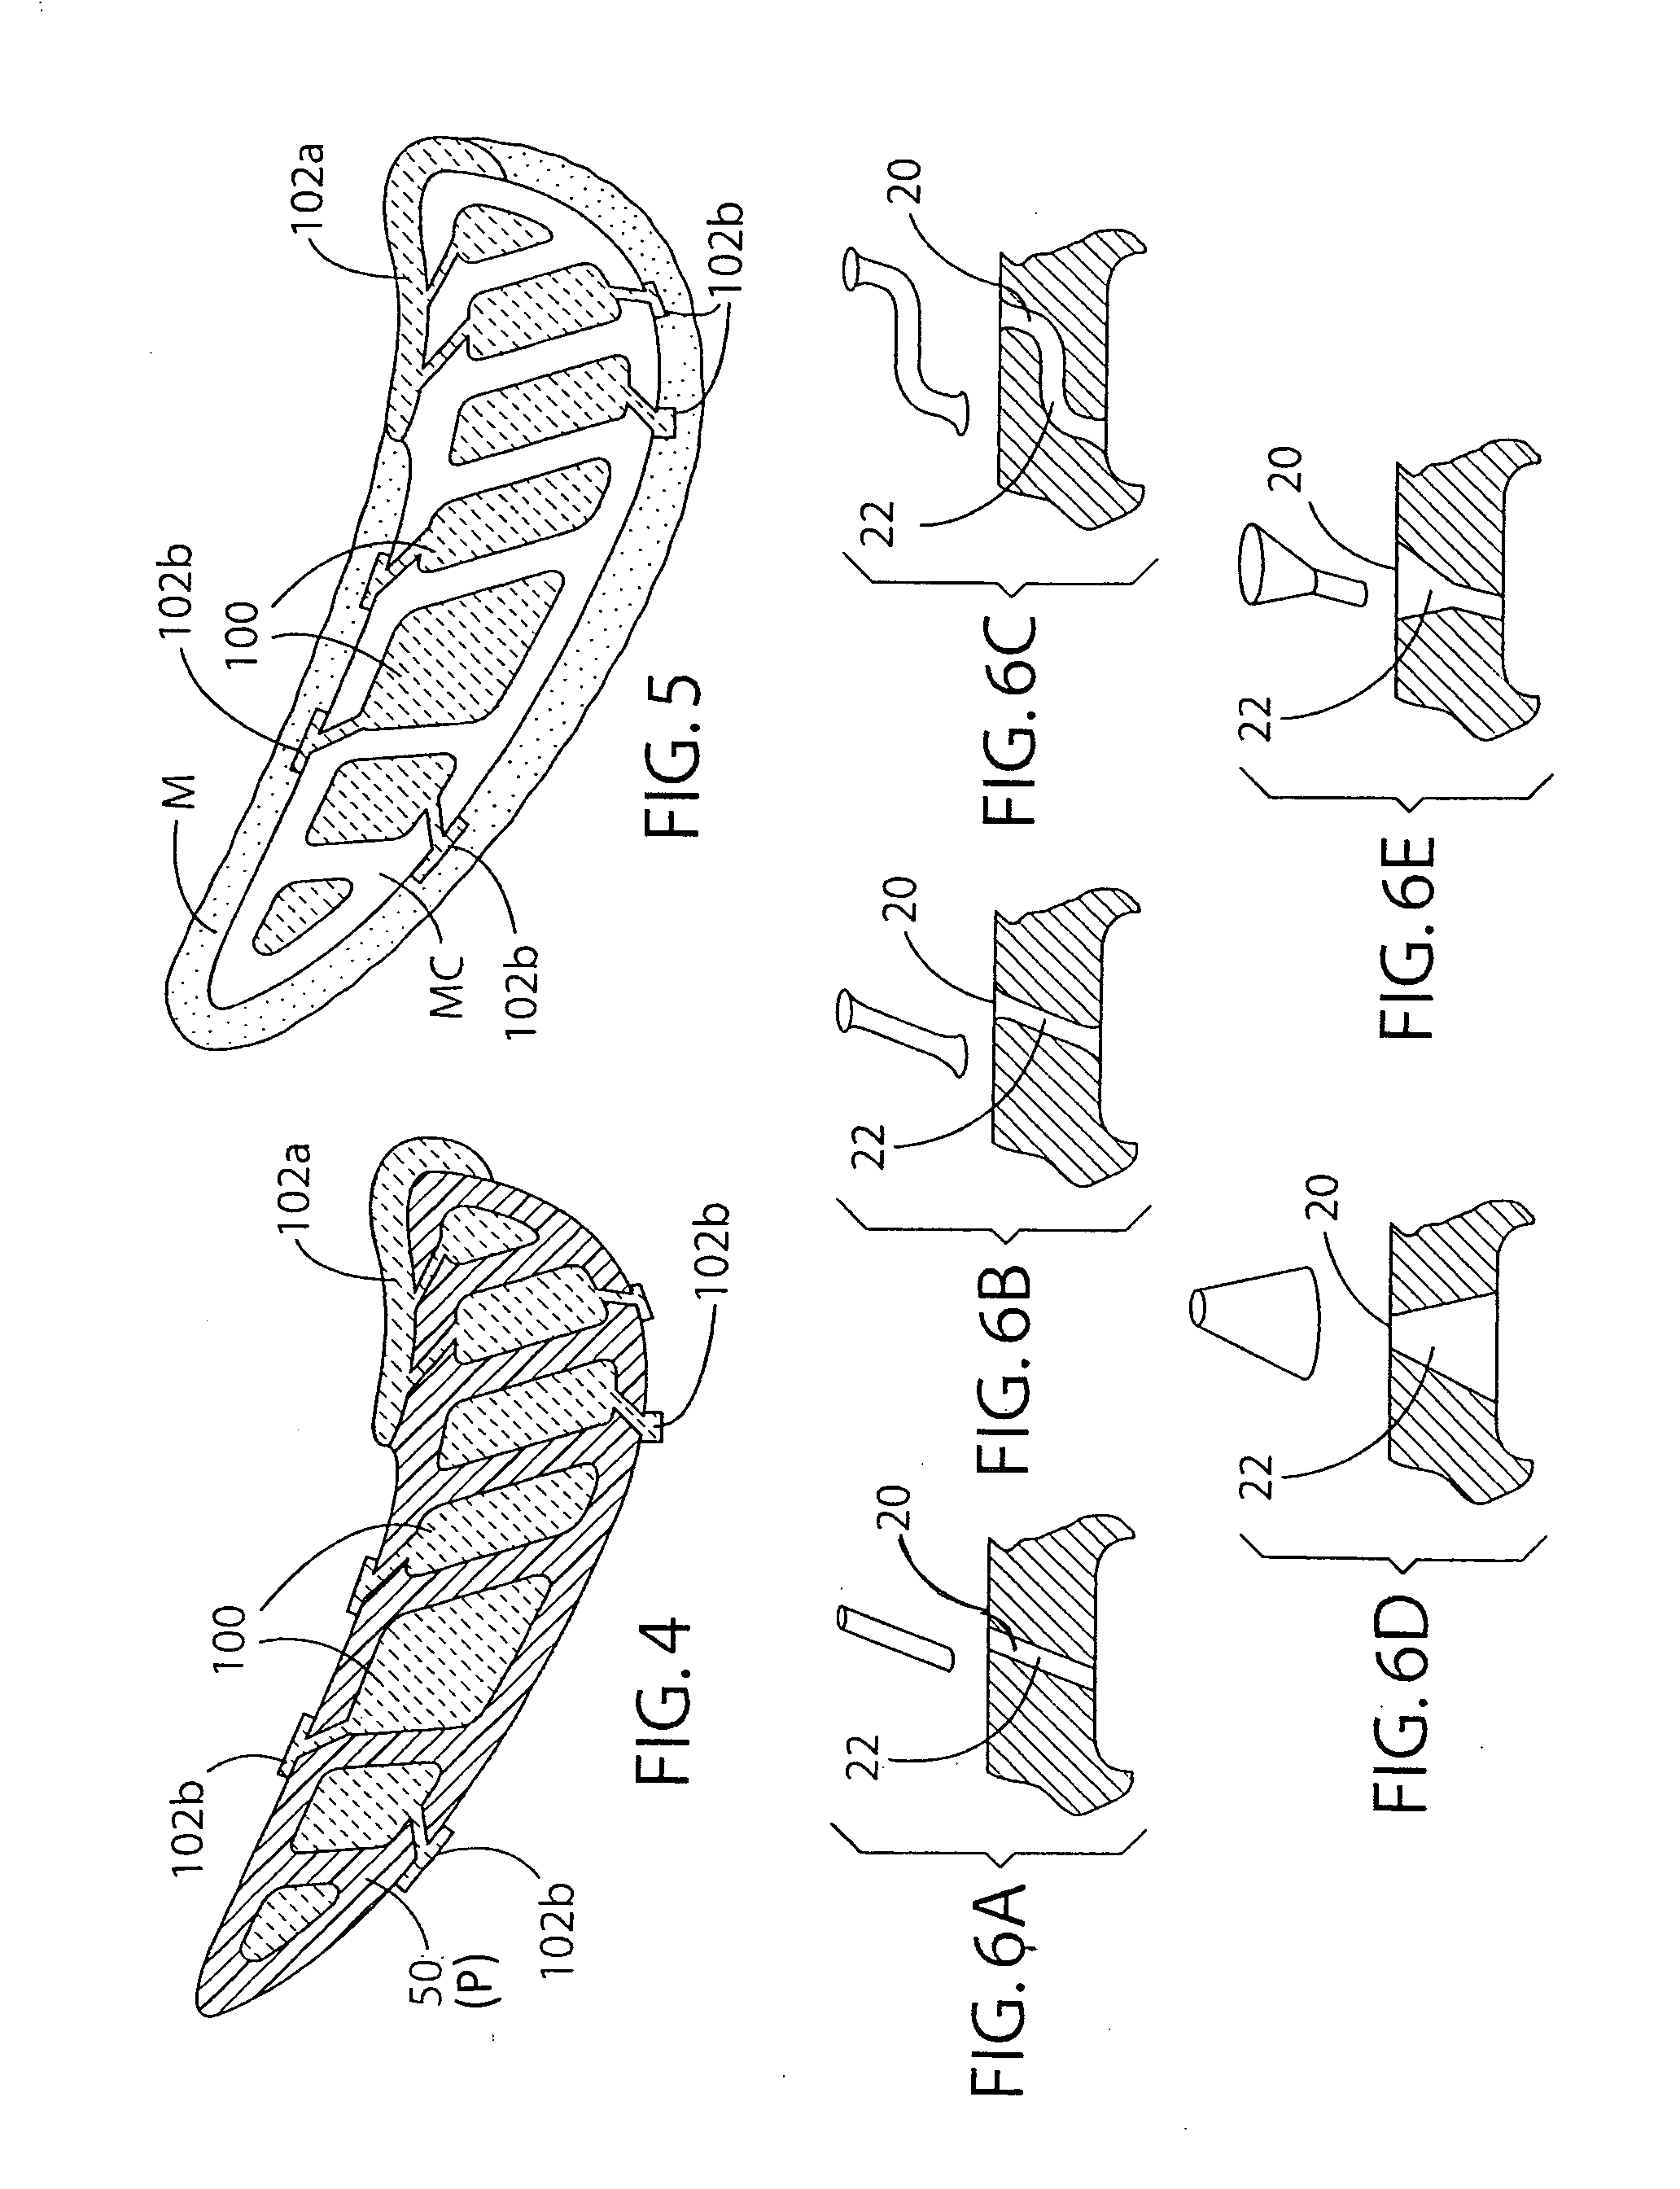 Cast-in cooling features especially for turbine airfoils